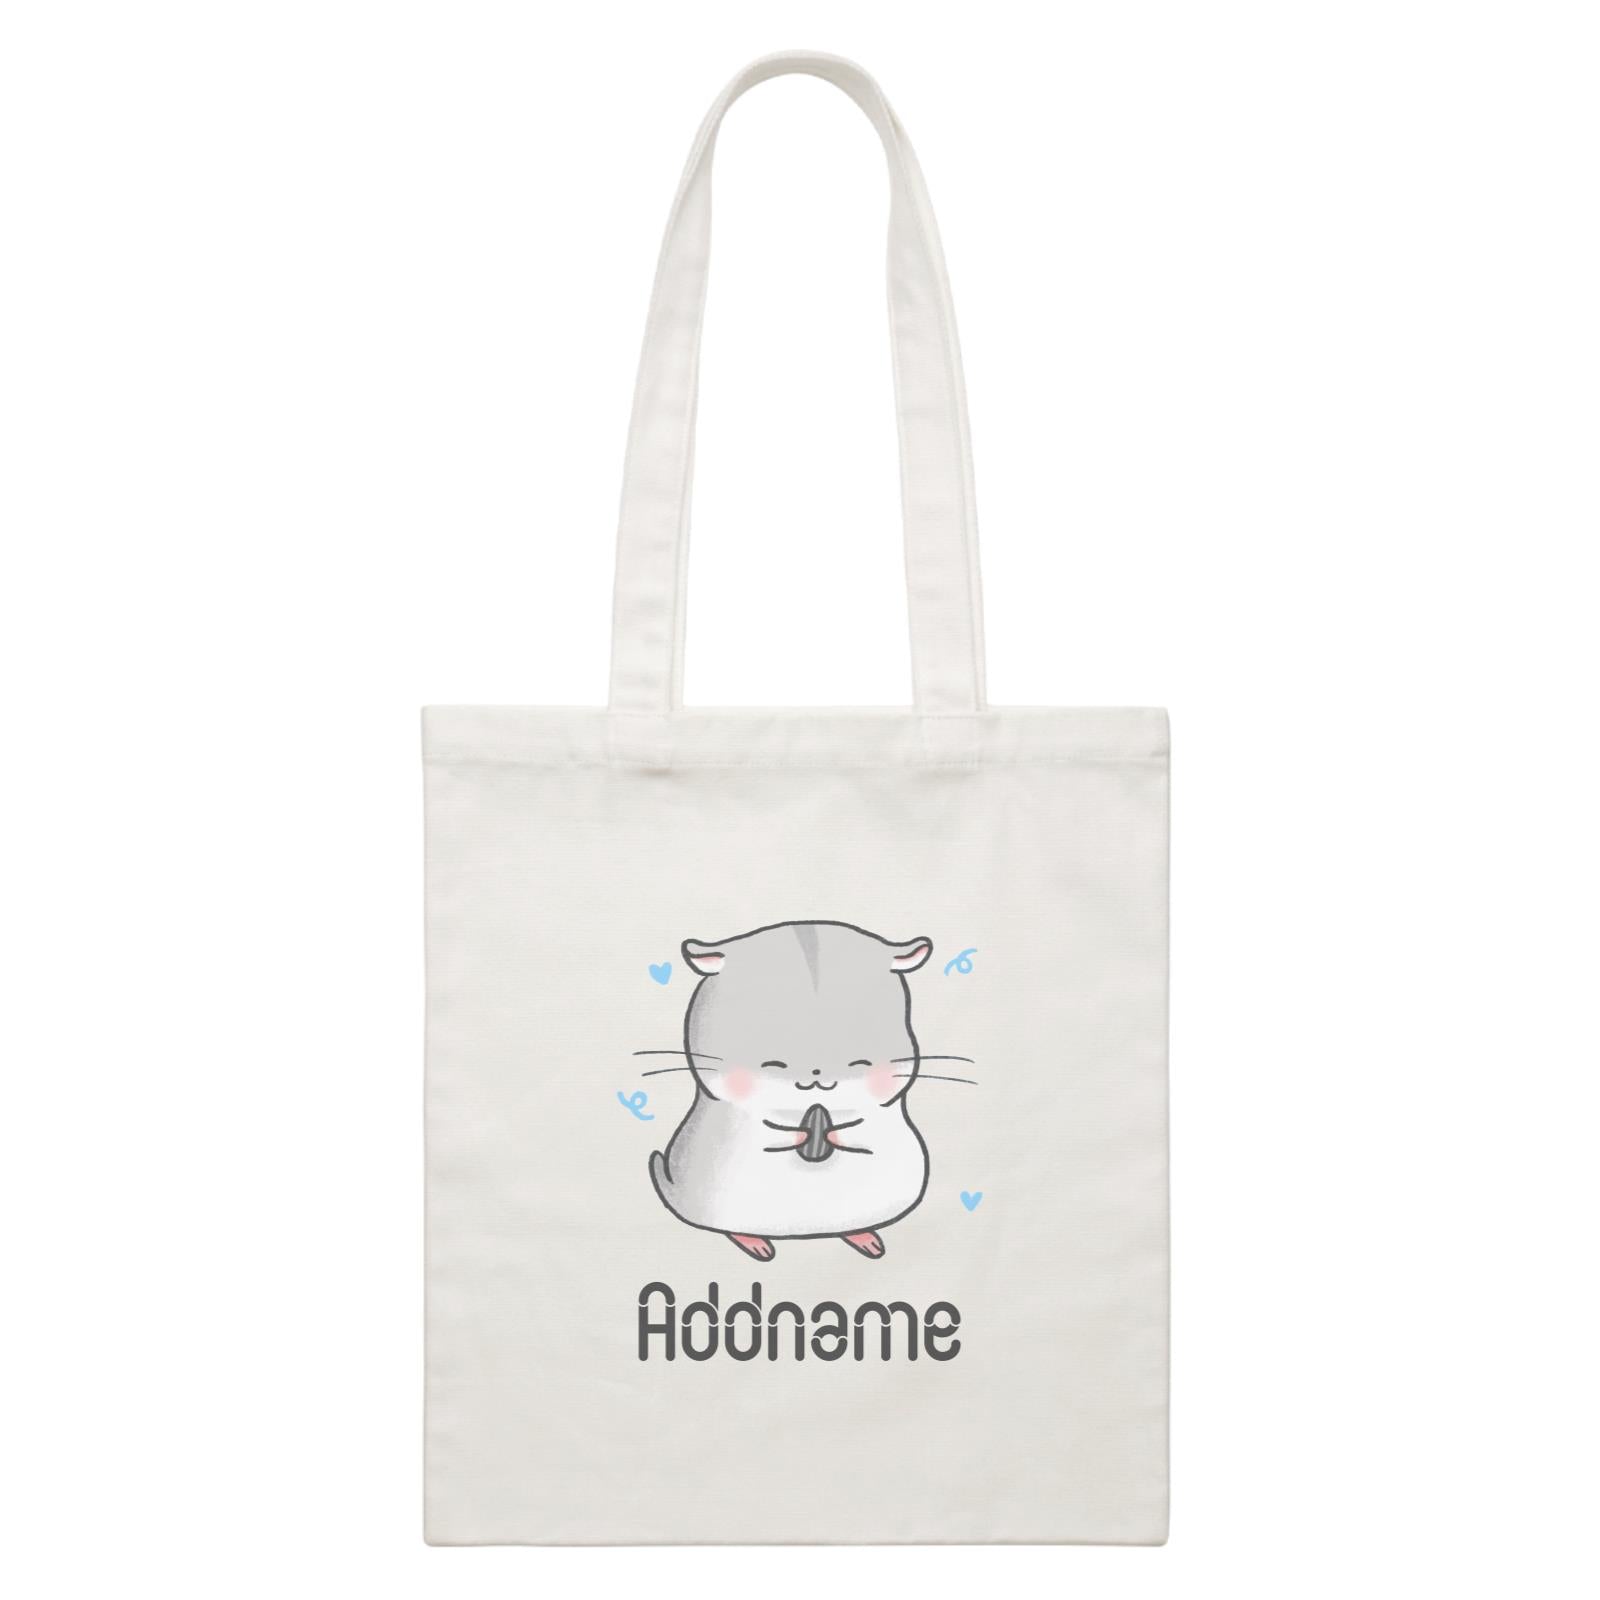 Cute Hand Drawn Style Hamster Addname White Canvas Bag